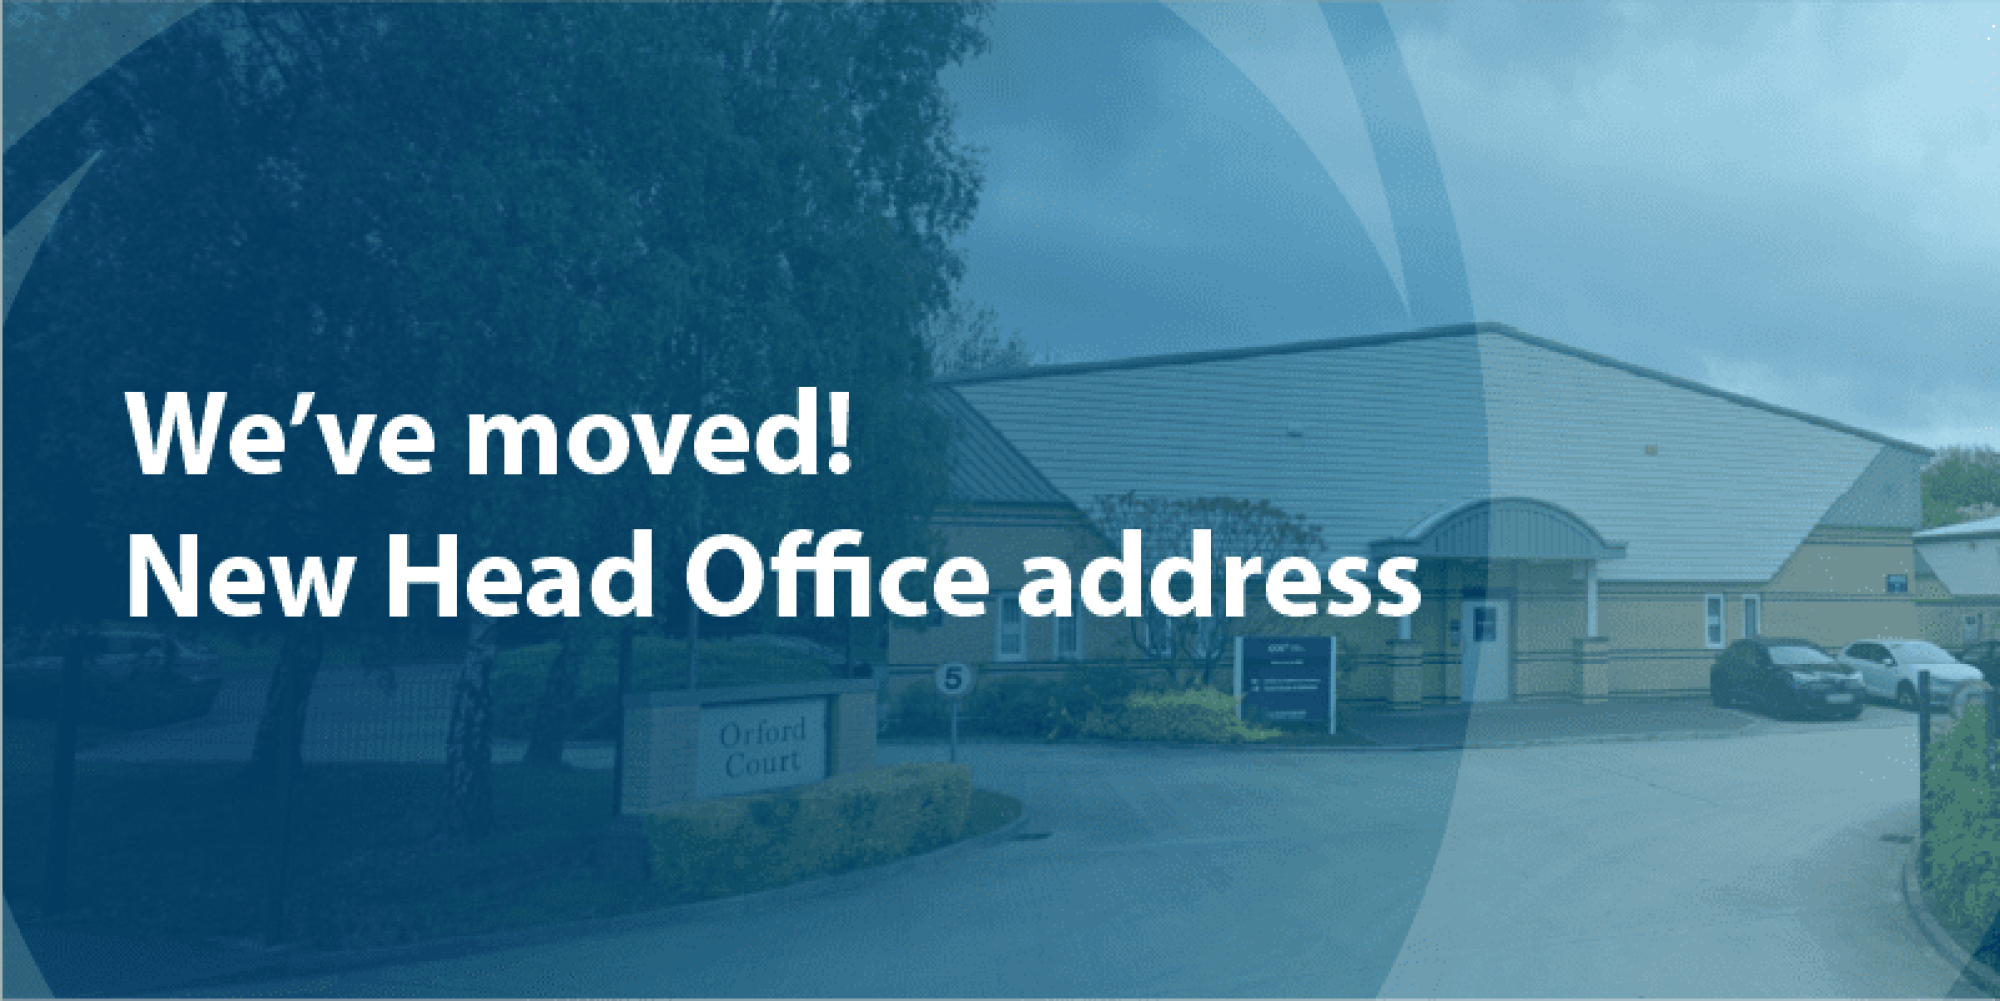  We've moved! New CCS Garage Equipment Head Office address 